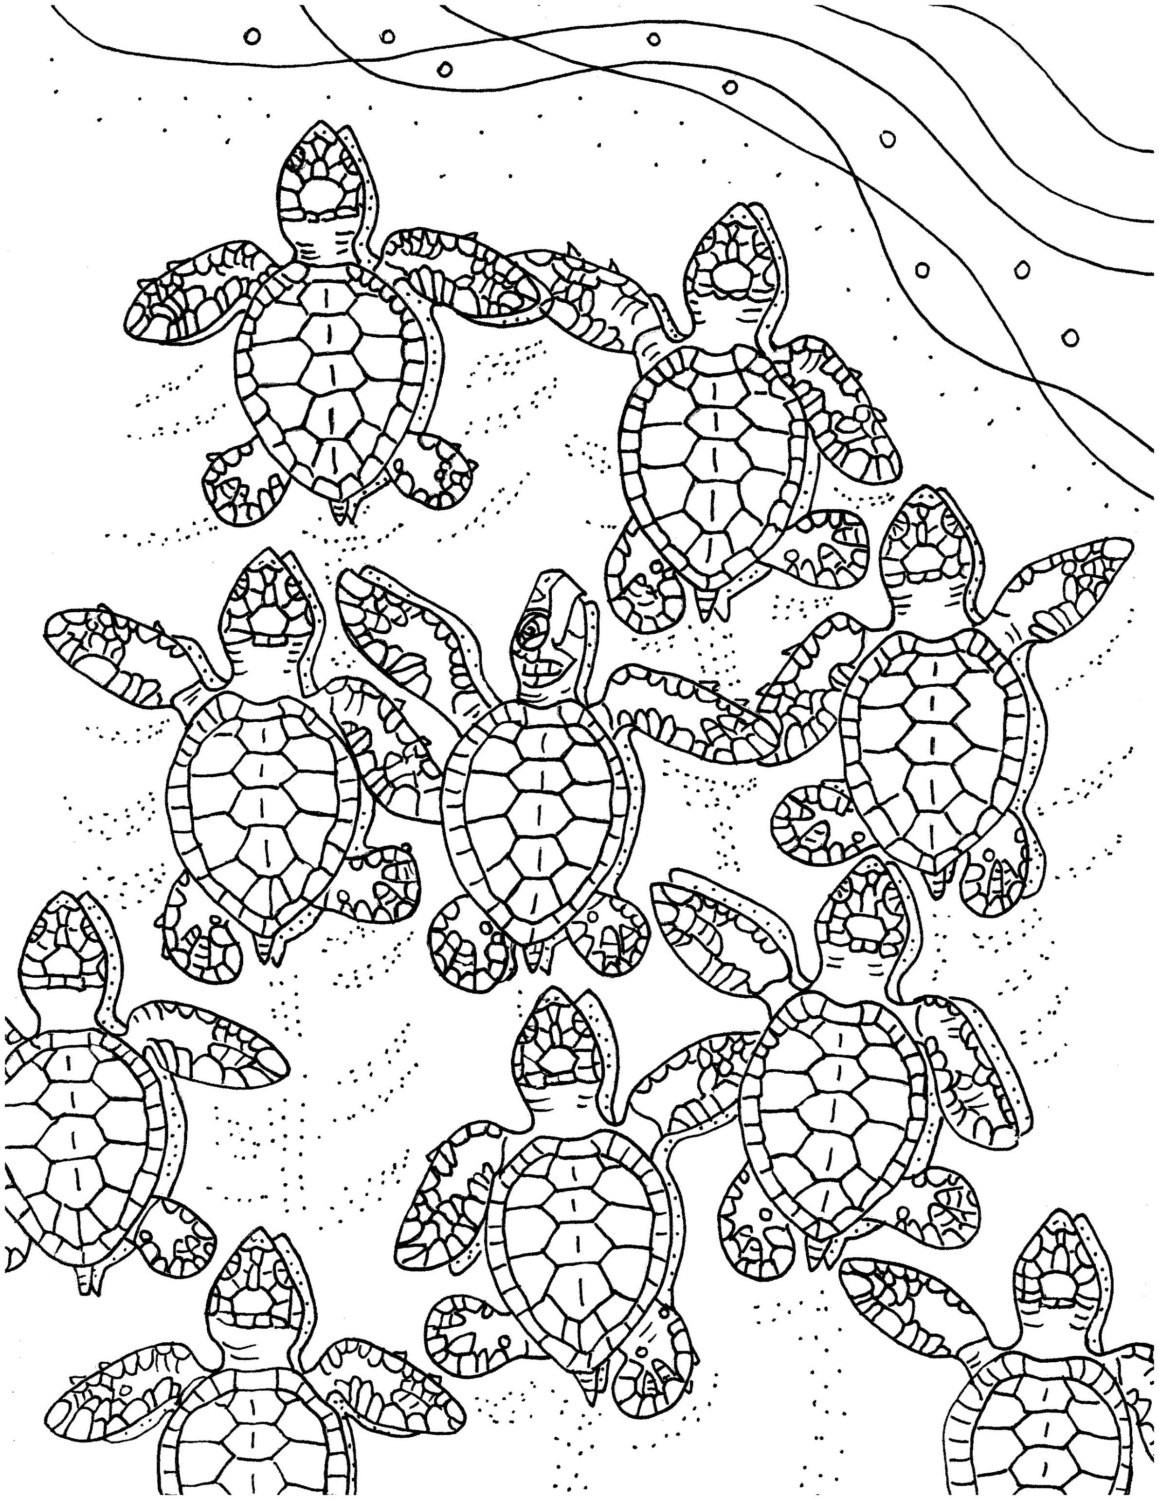 Turtle Coloring Pages For Adults
 Baby Sea Turtles coloring page embroidery pattern sea